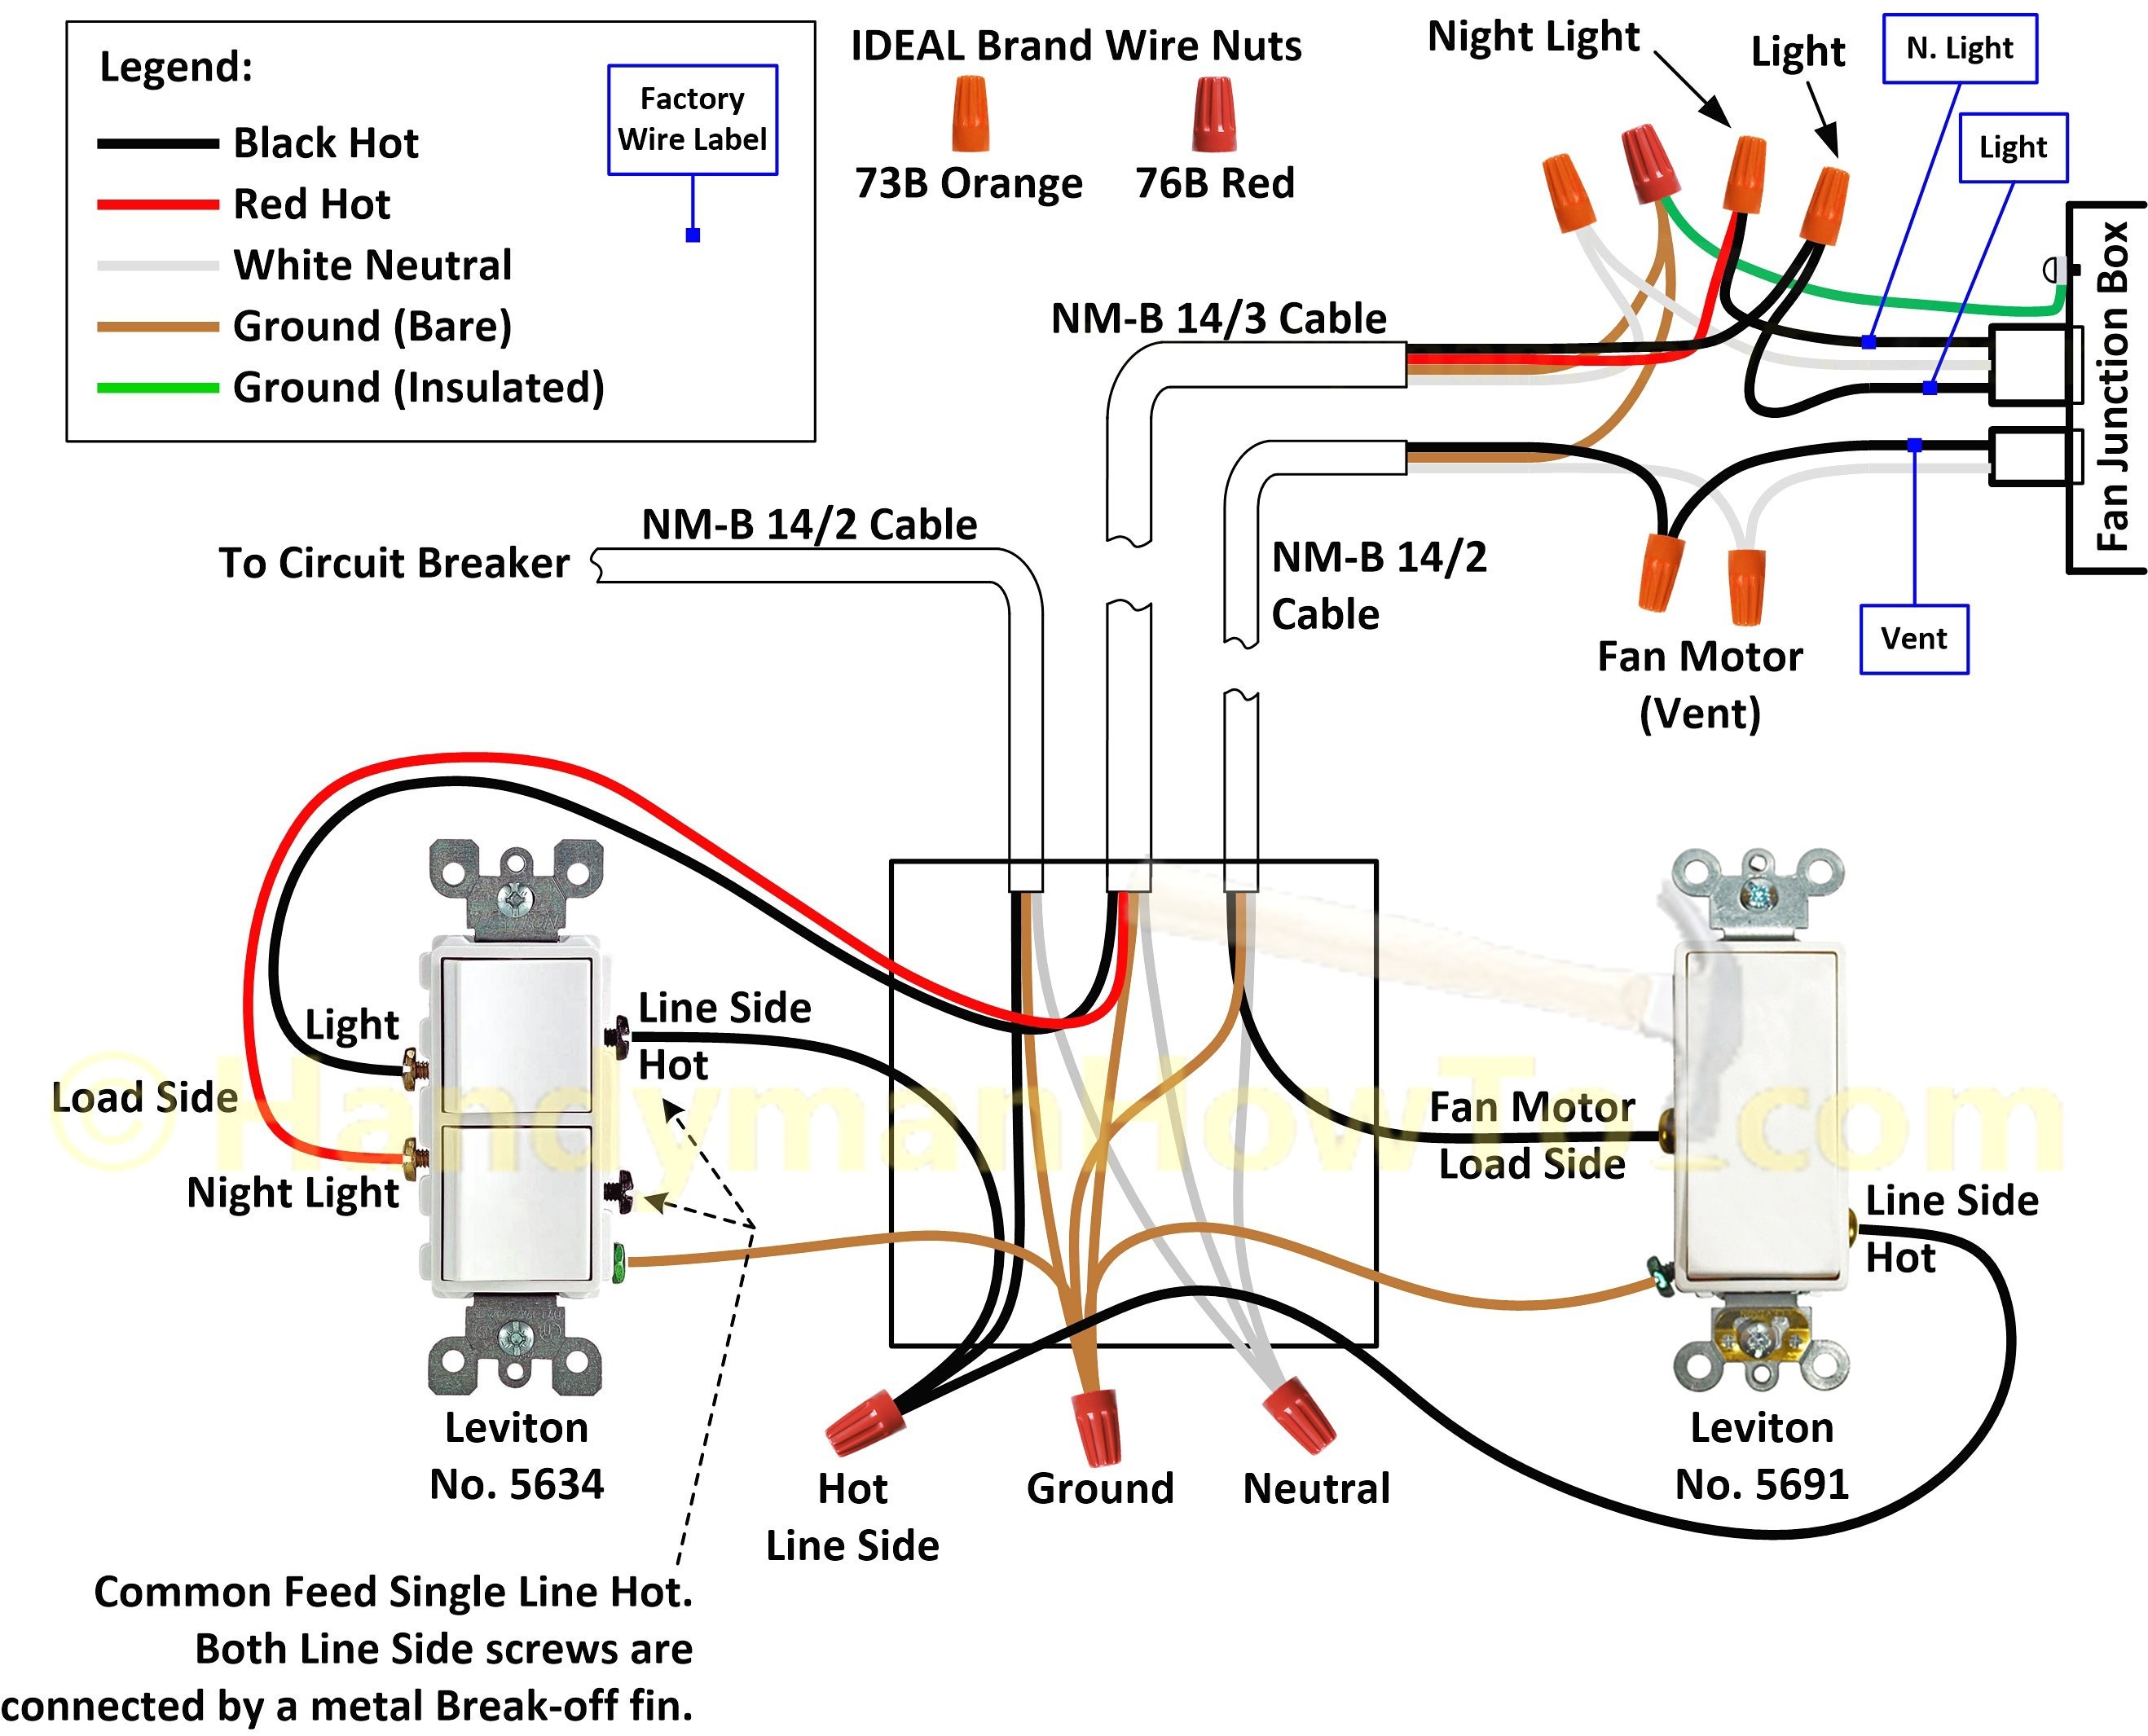 Wiring Diagram for Drag Car Refrence Wiring Diagram for Legend Race Car Save Bajaj Legend Wiring